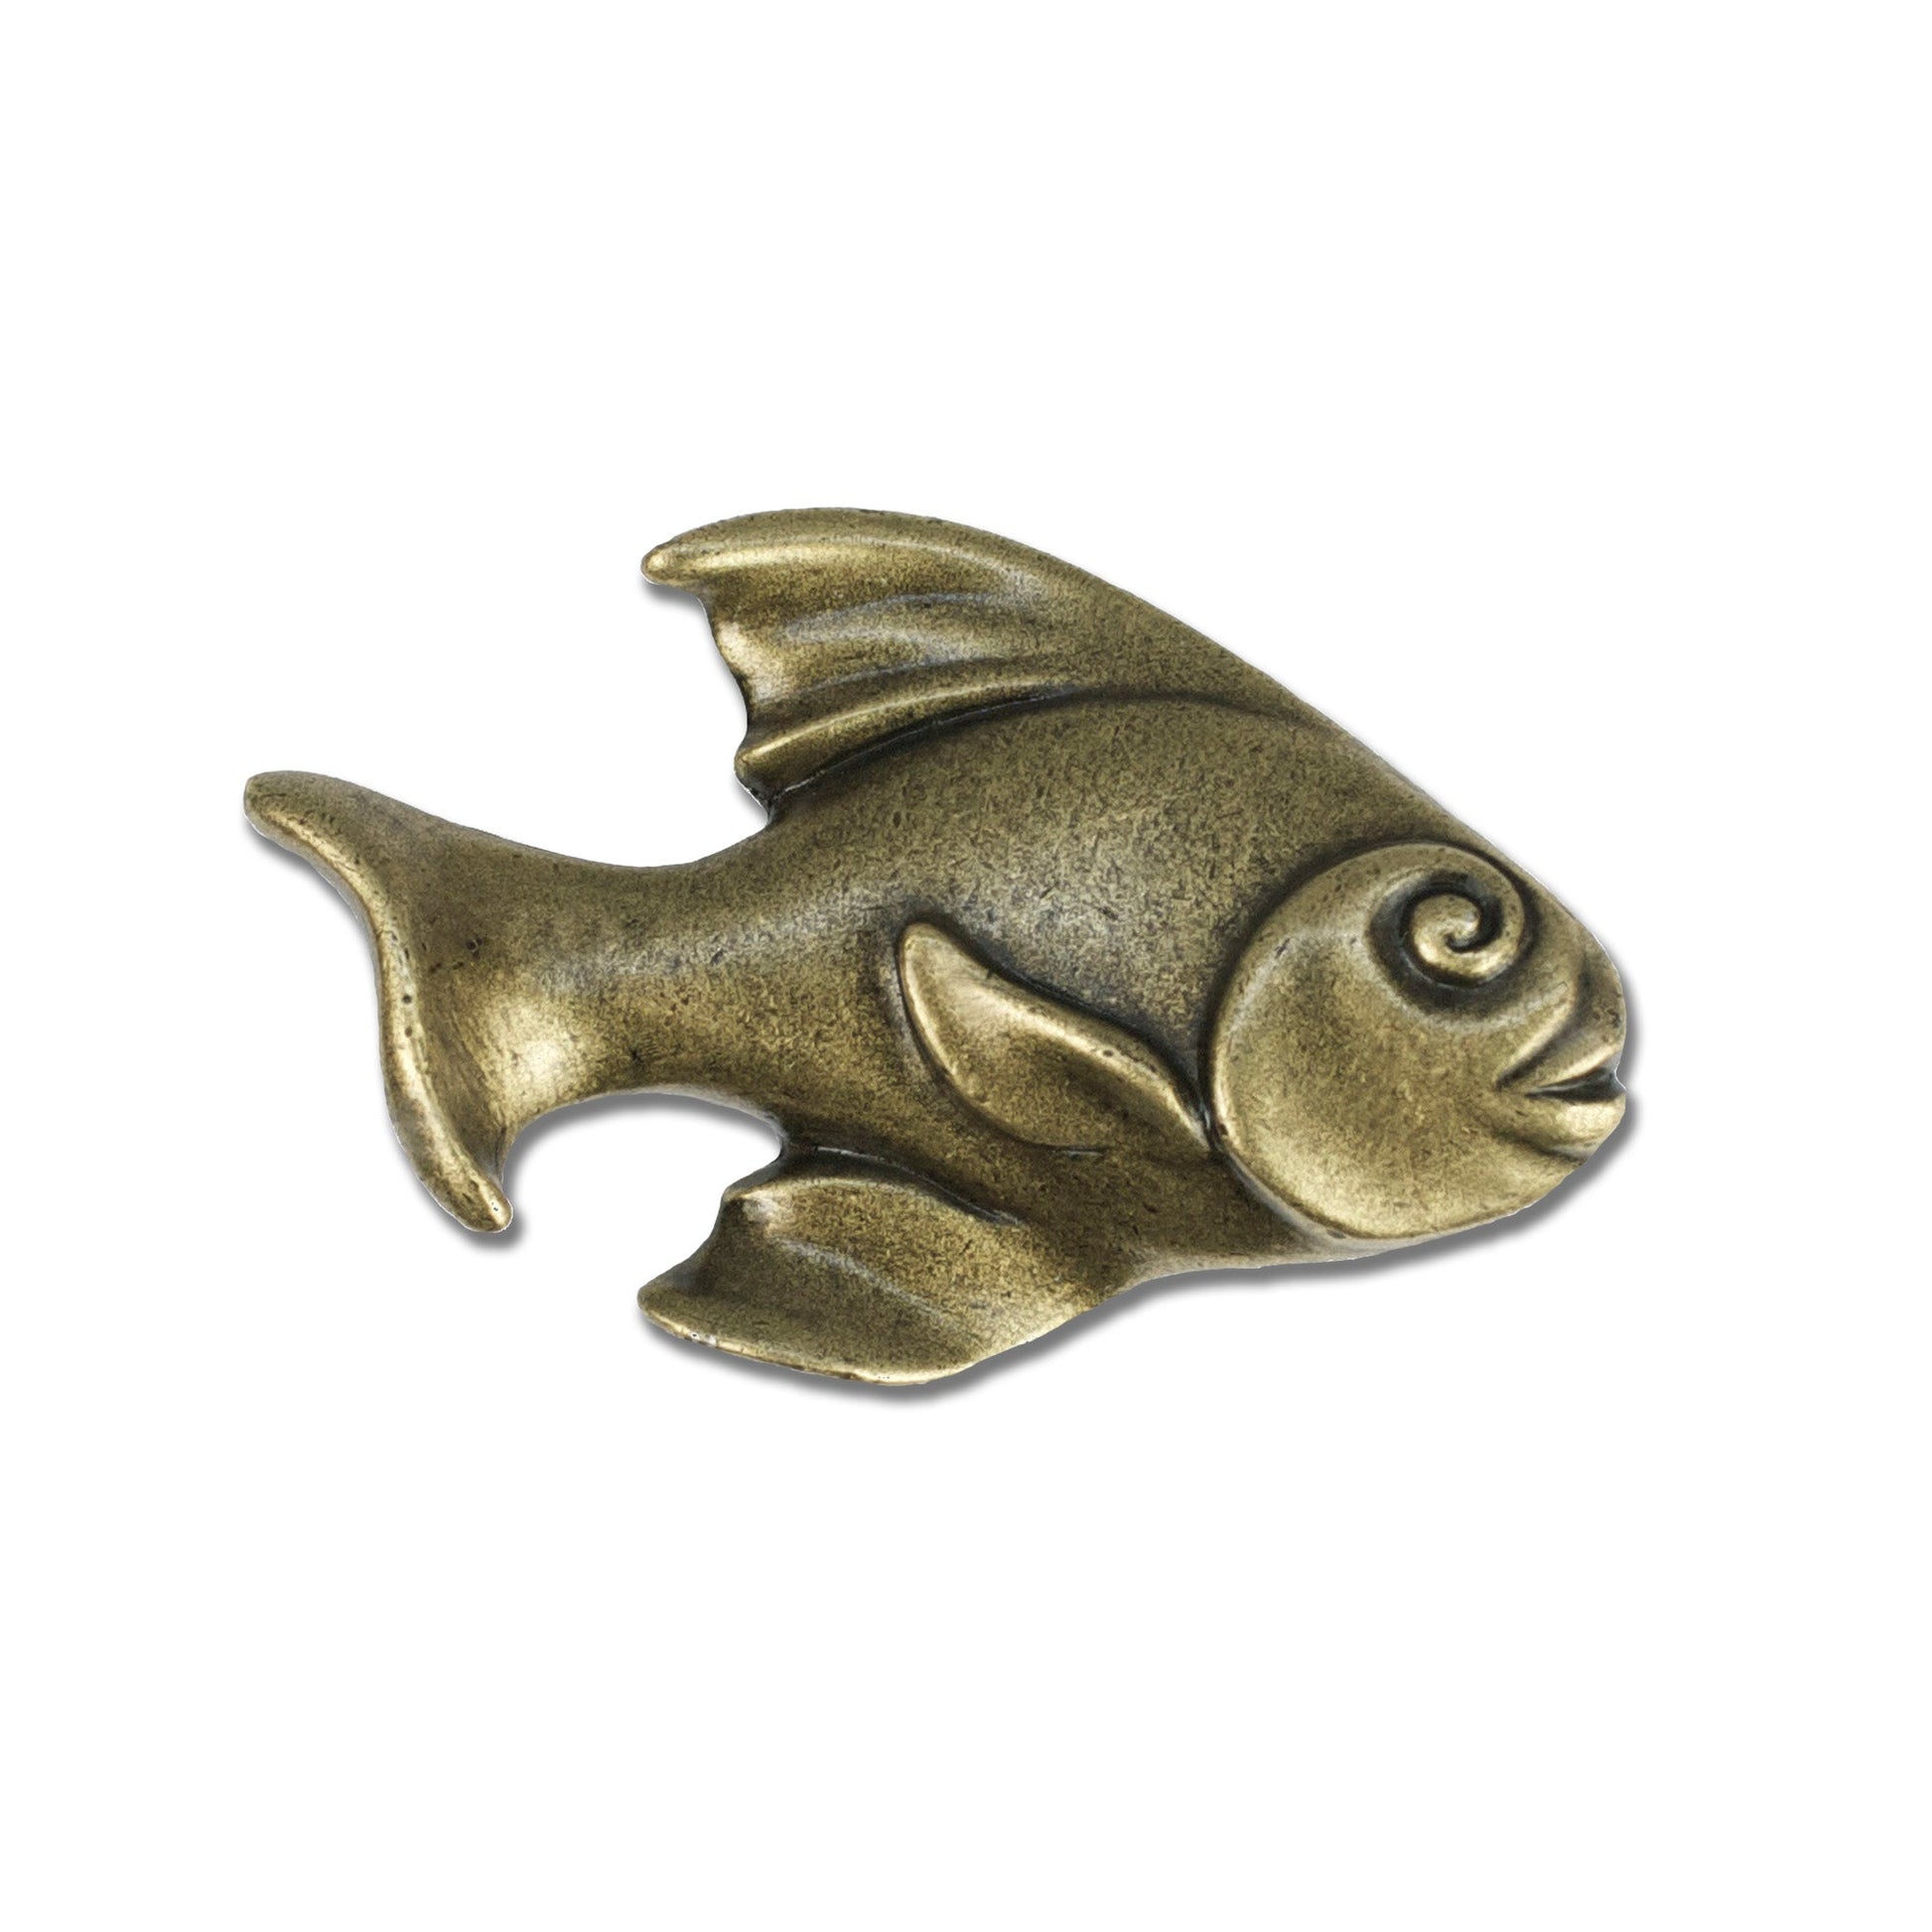 Fish Drawer Pull and Knobs- Fish Handles, Ocean Theme Drawer Pulls and Knobs, Coastal Drawer Pulls, Nautical Drawer Pulls, Sea Life Cabinet Pull - The Tool Store